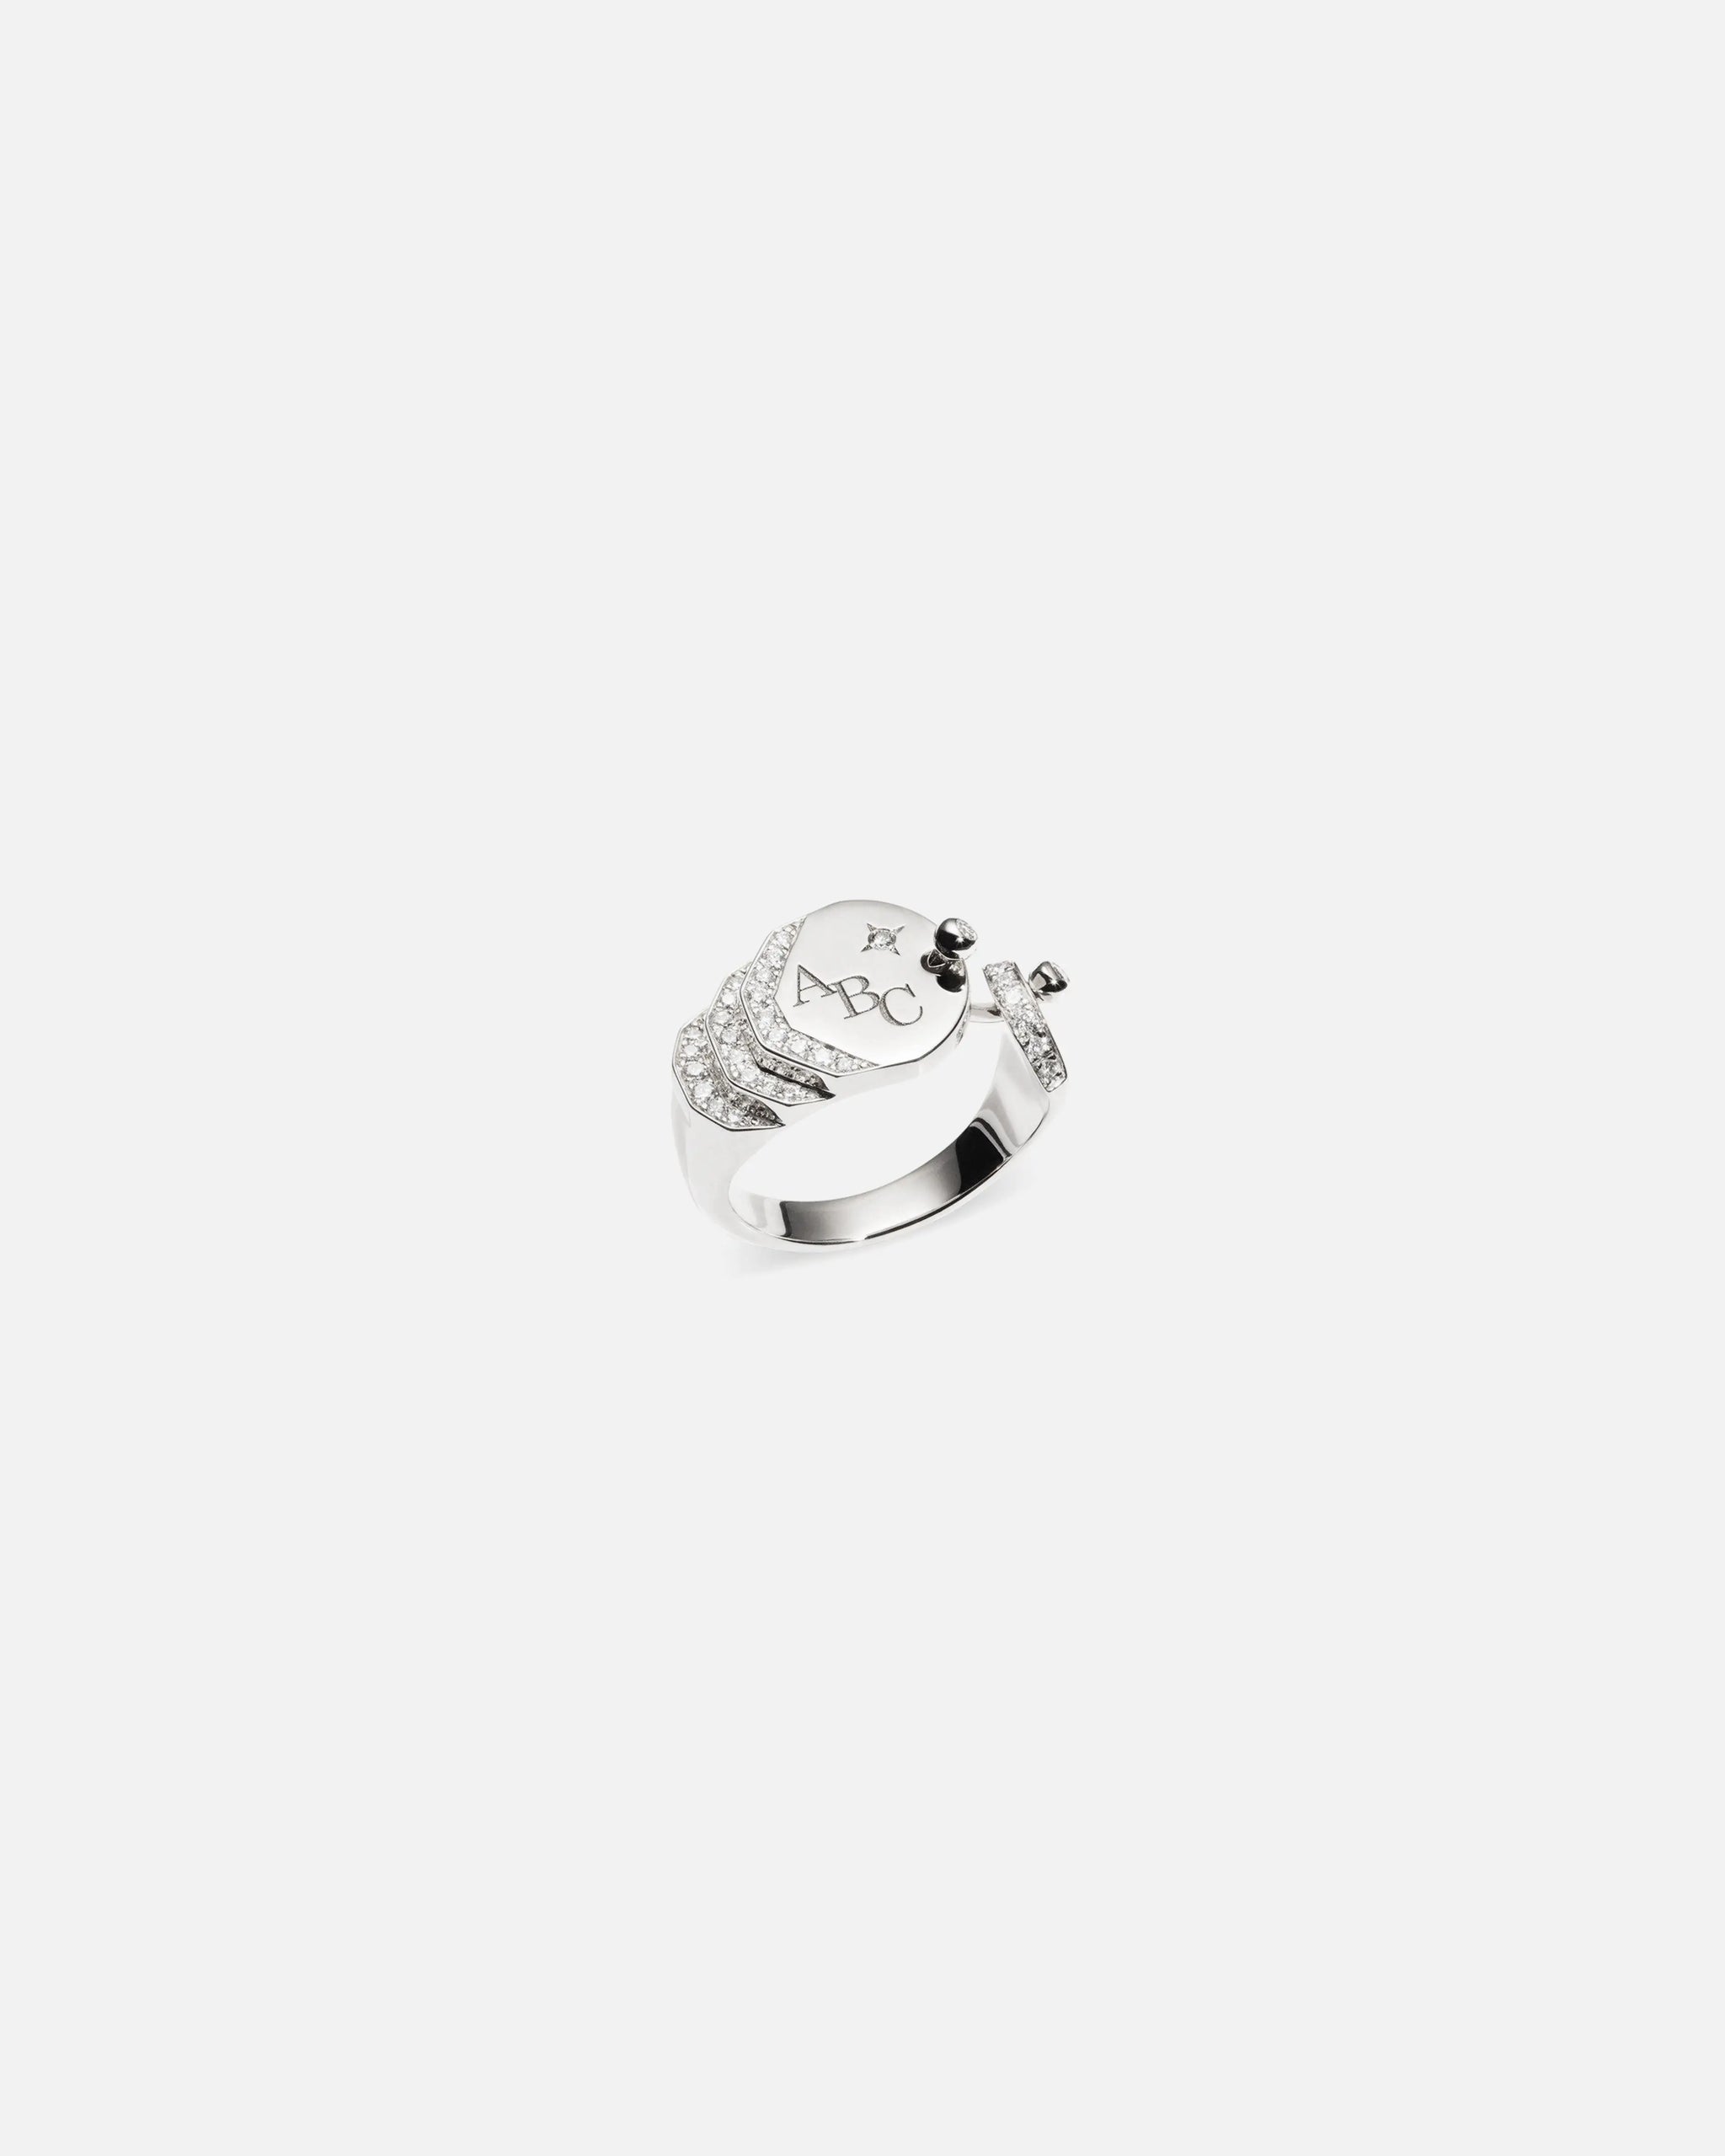 Diamond Mood Signet Ring in White Gold - Nouvel Heritage - Nouvel Heritage